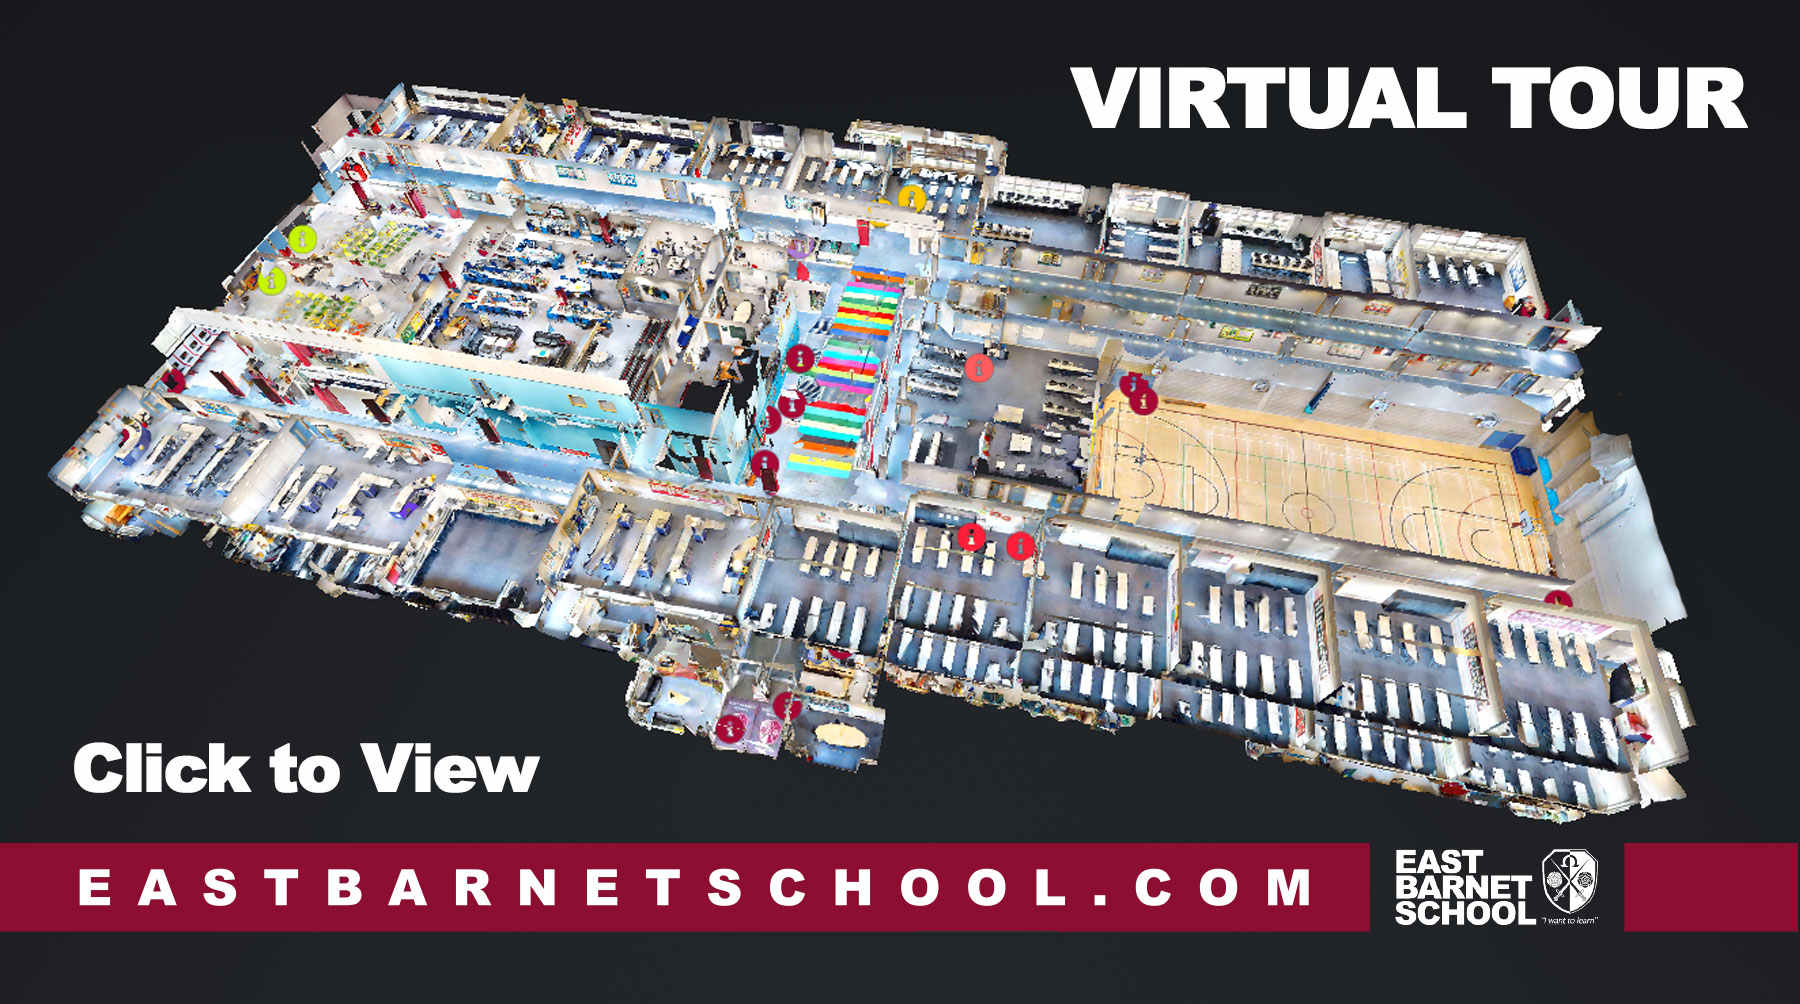 A thumbnail showing a dollhouse view of the whole school to click and open the virtual tour